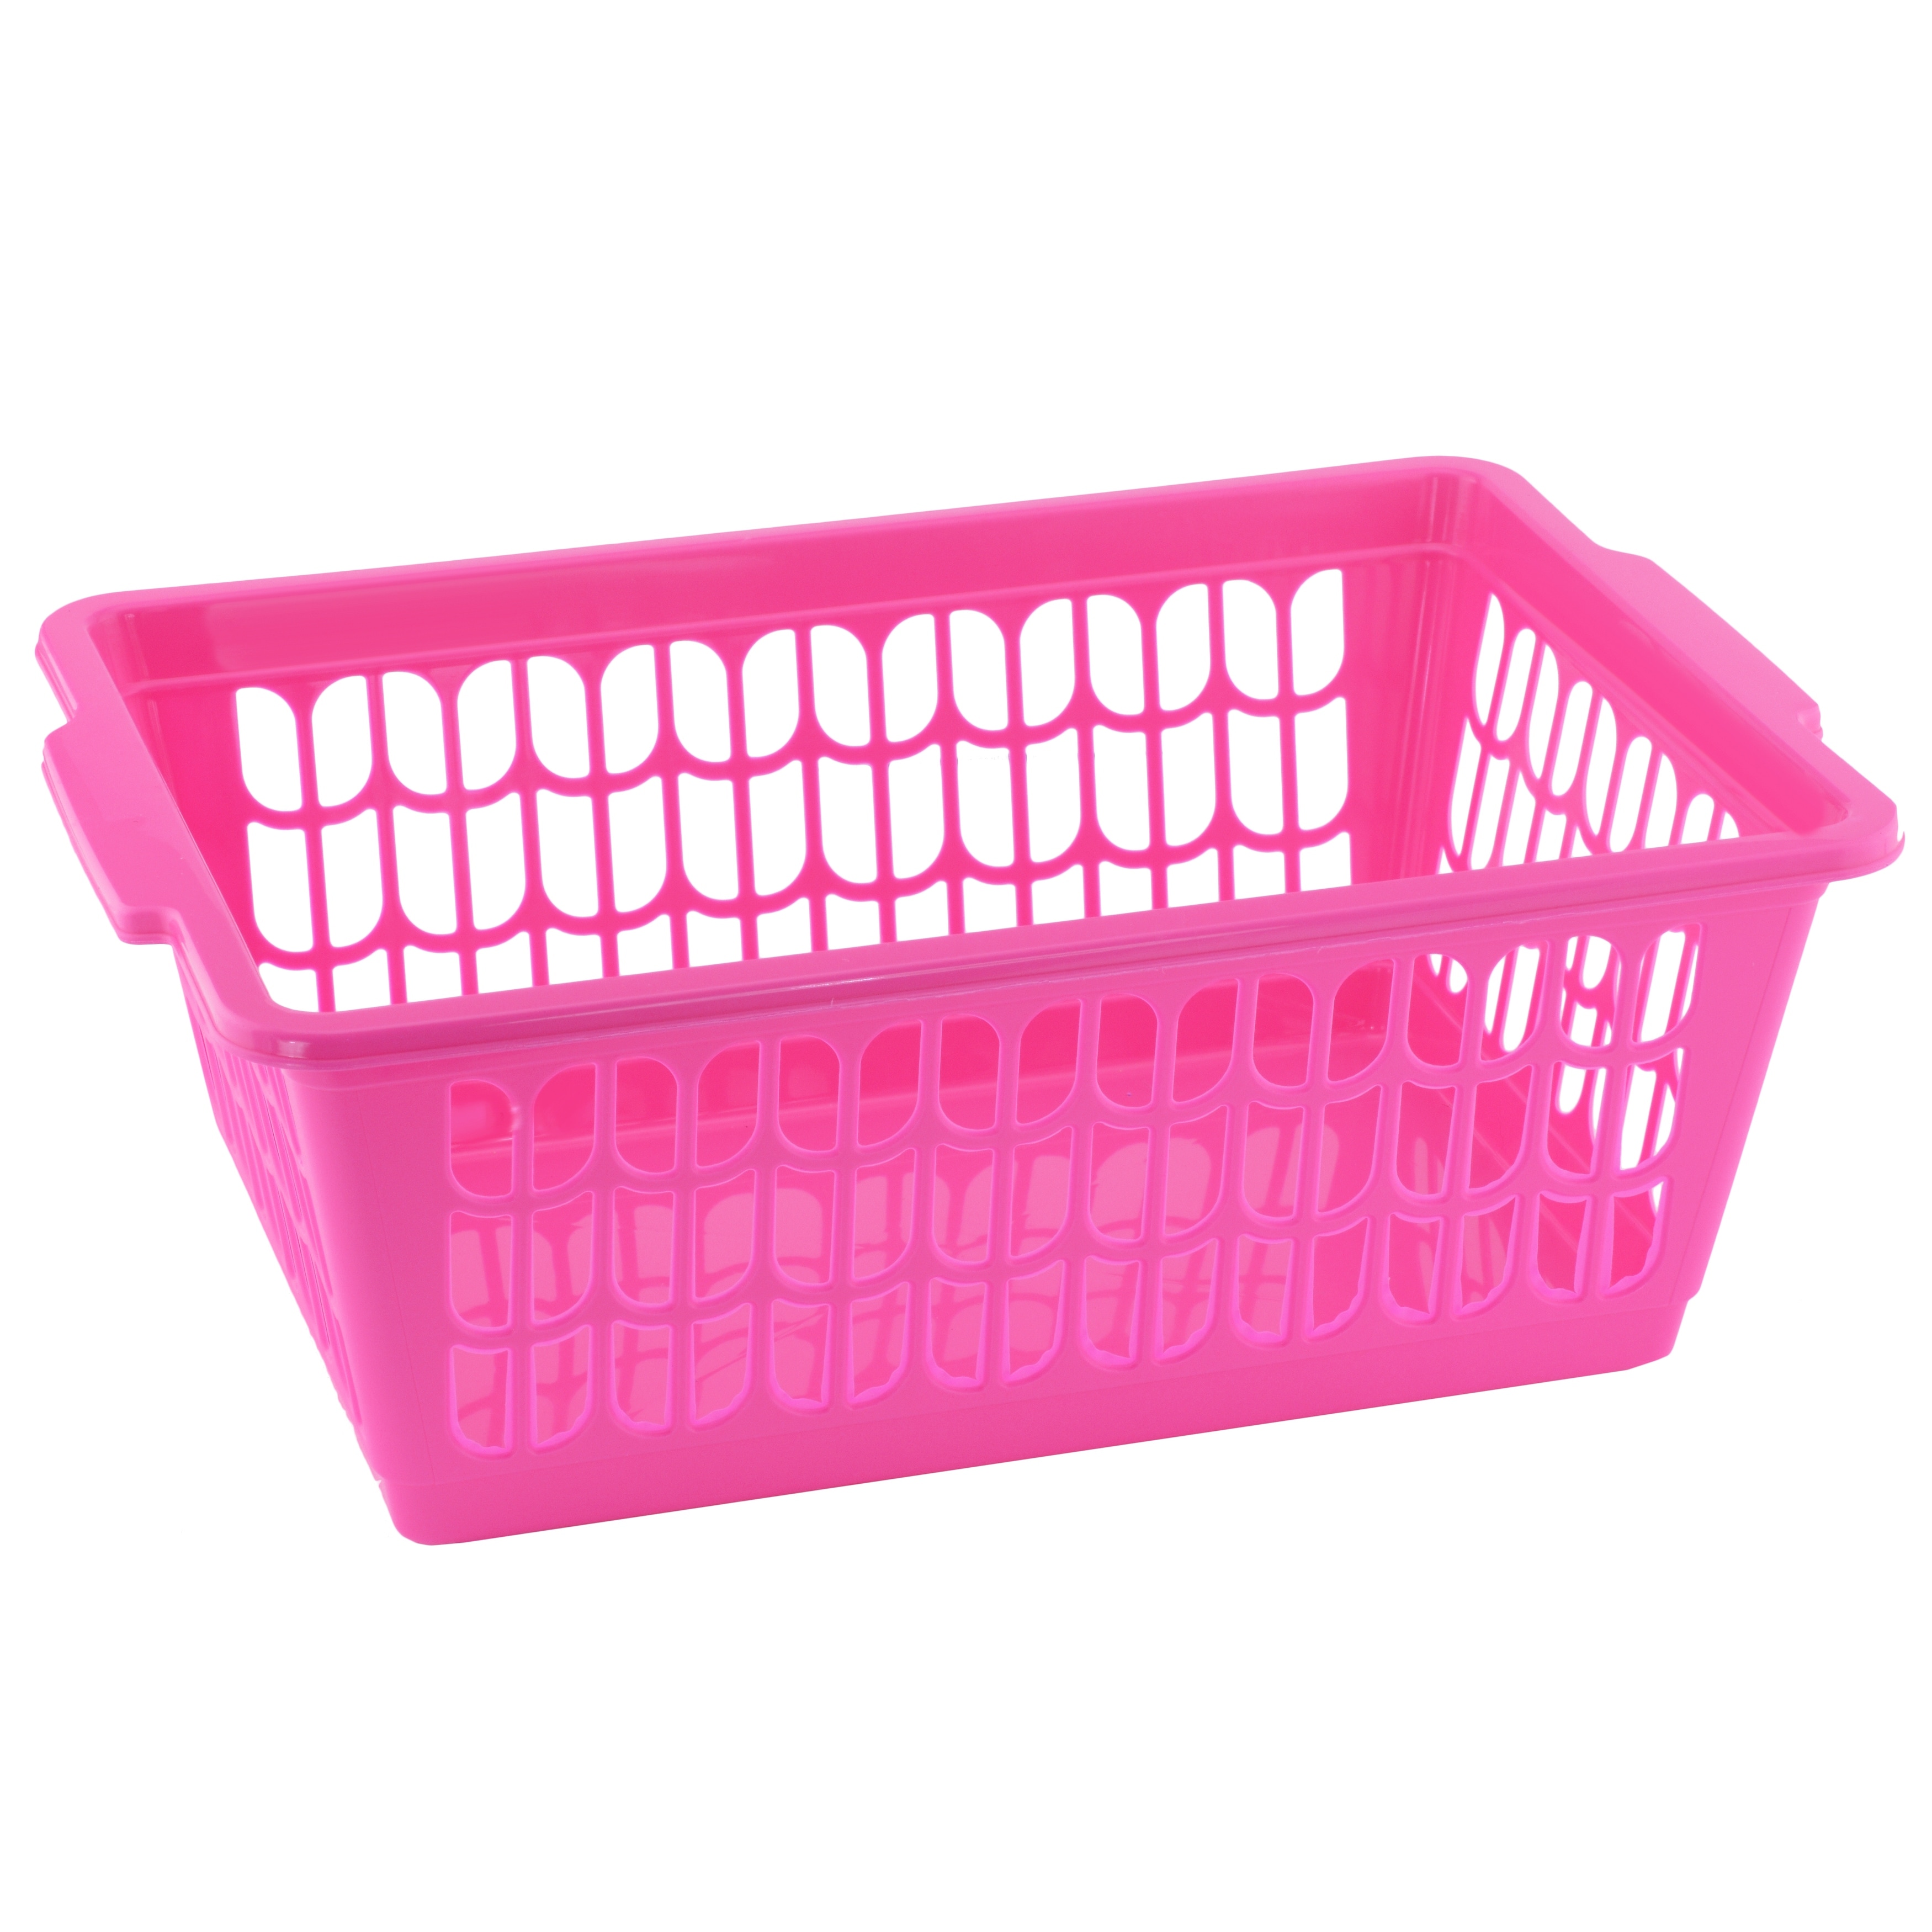 https://ak1.ostkcdn.com/images/products/is/images/direct/abf417a5c067f523f2dfd546d1cf8946217e22b8/Small-Plastic-Storage-Basket-for-Organizing-Kitchen-Pantry%2C-Countertop.jpg